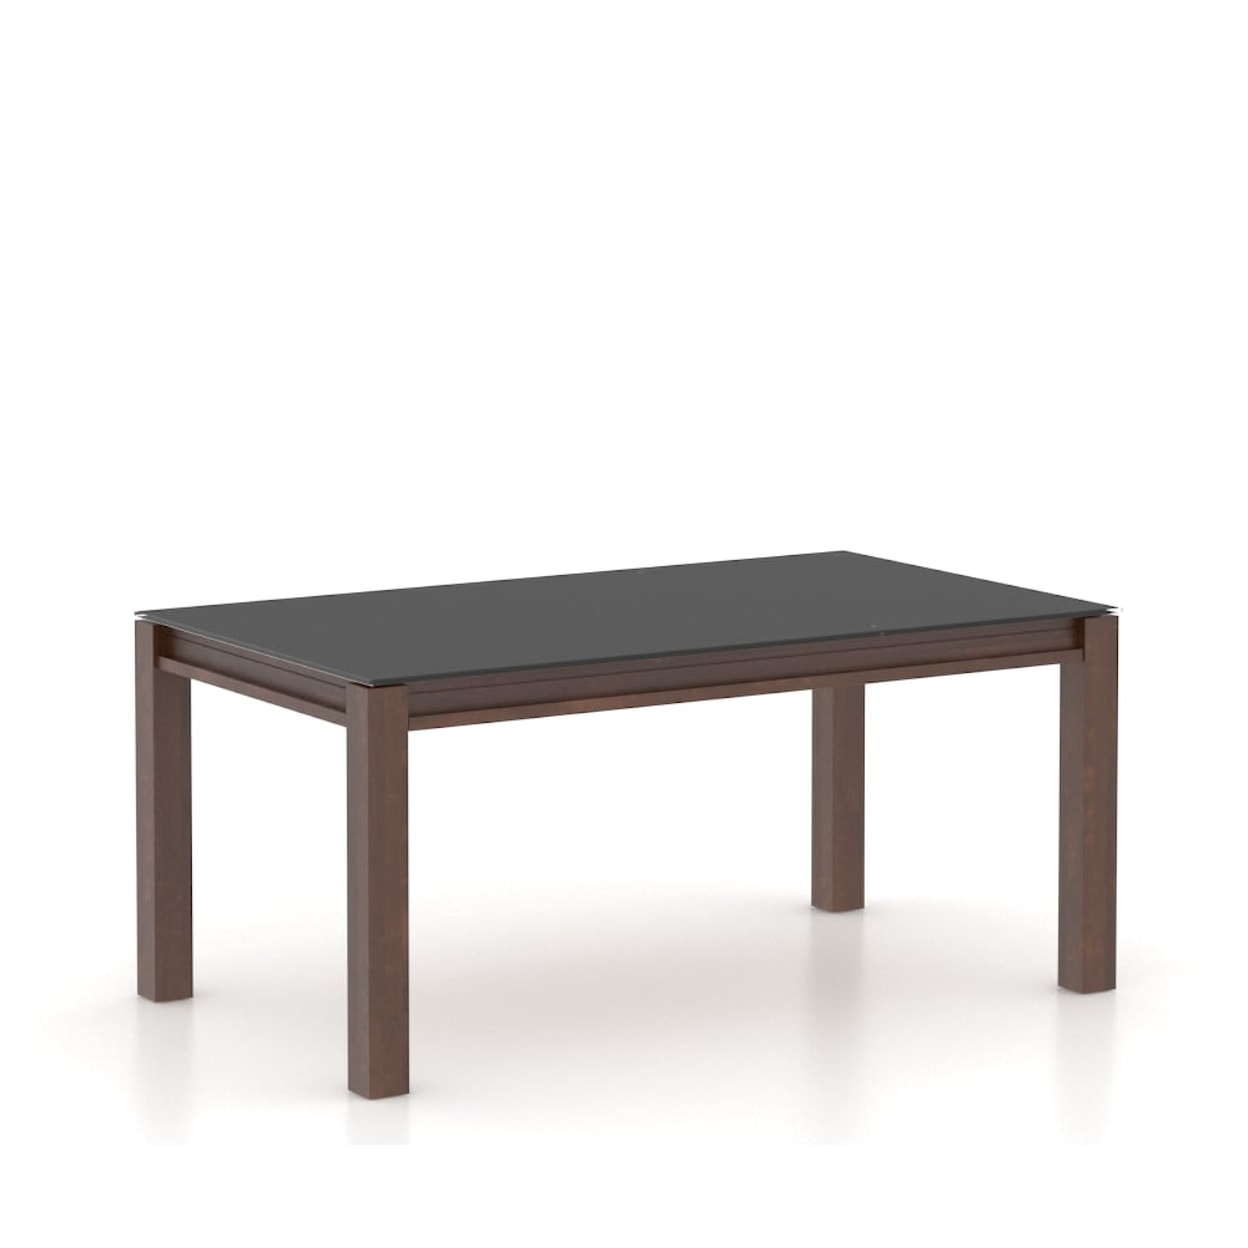 Canadel Gourmet. Customizable Dining Table w/ Glass Top